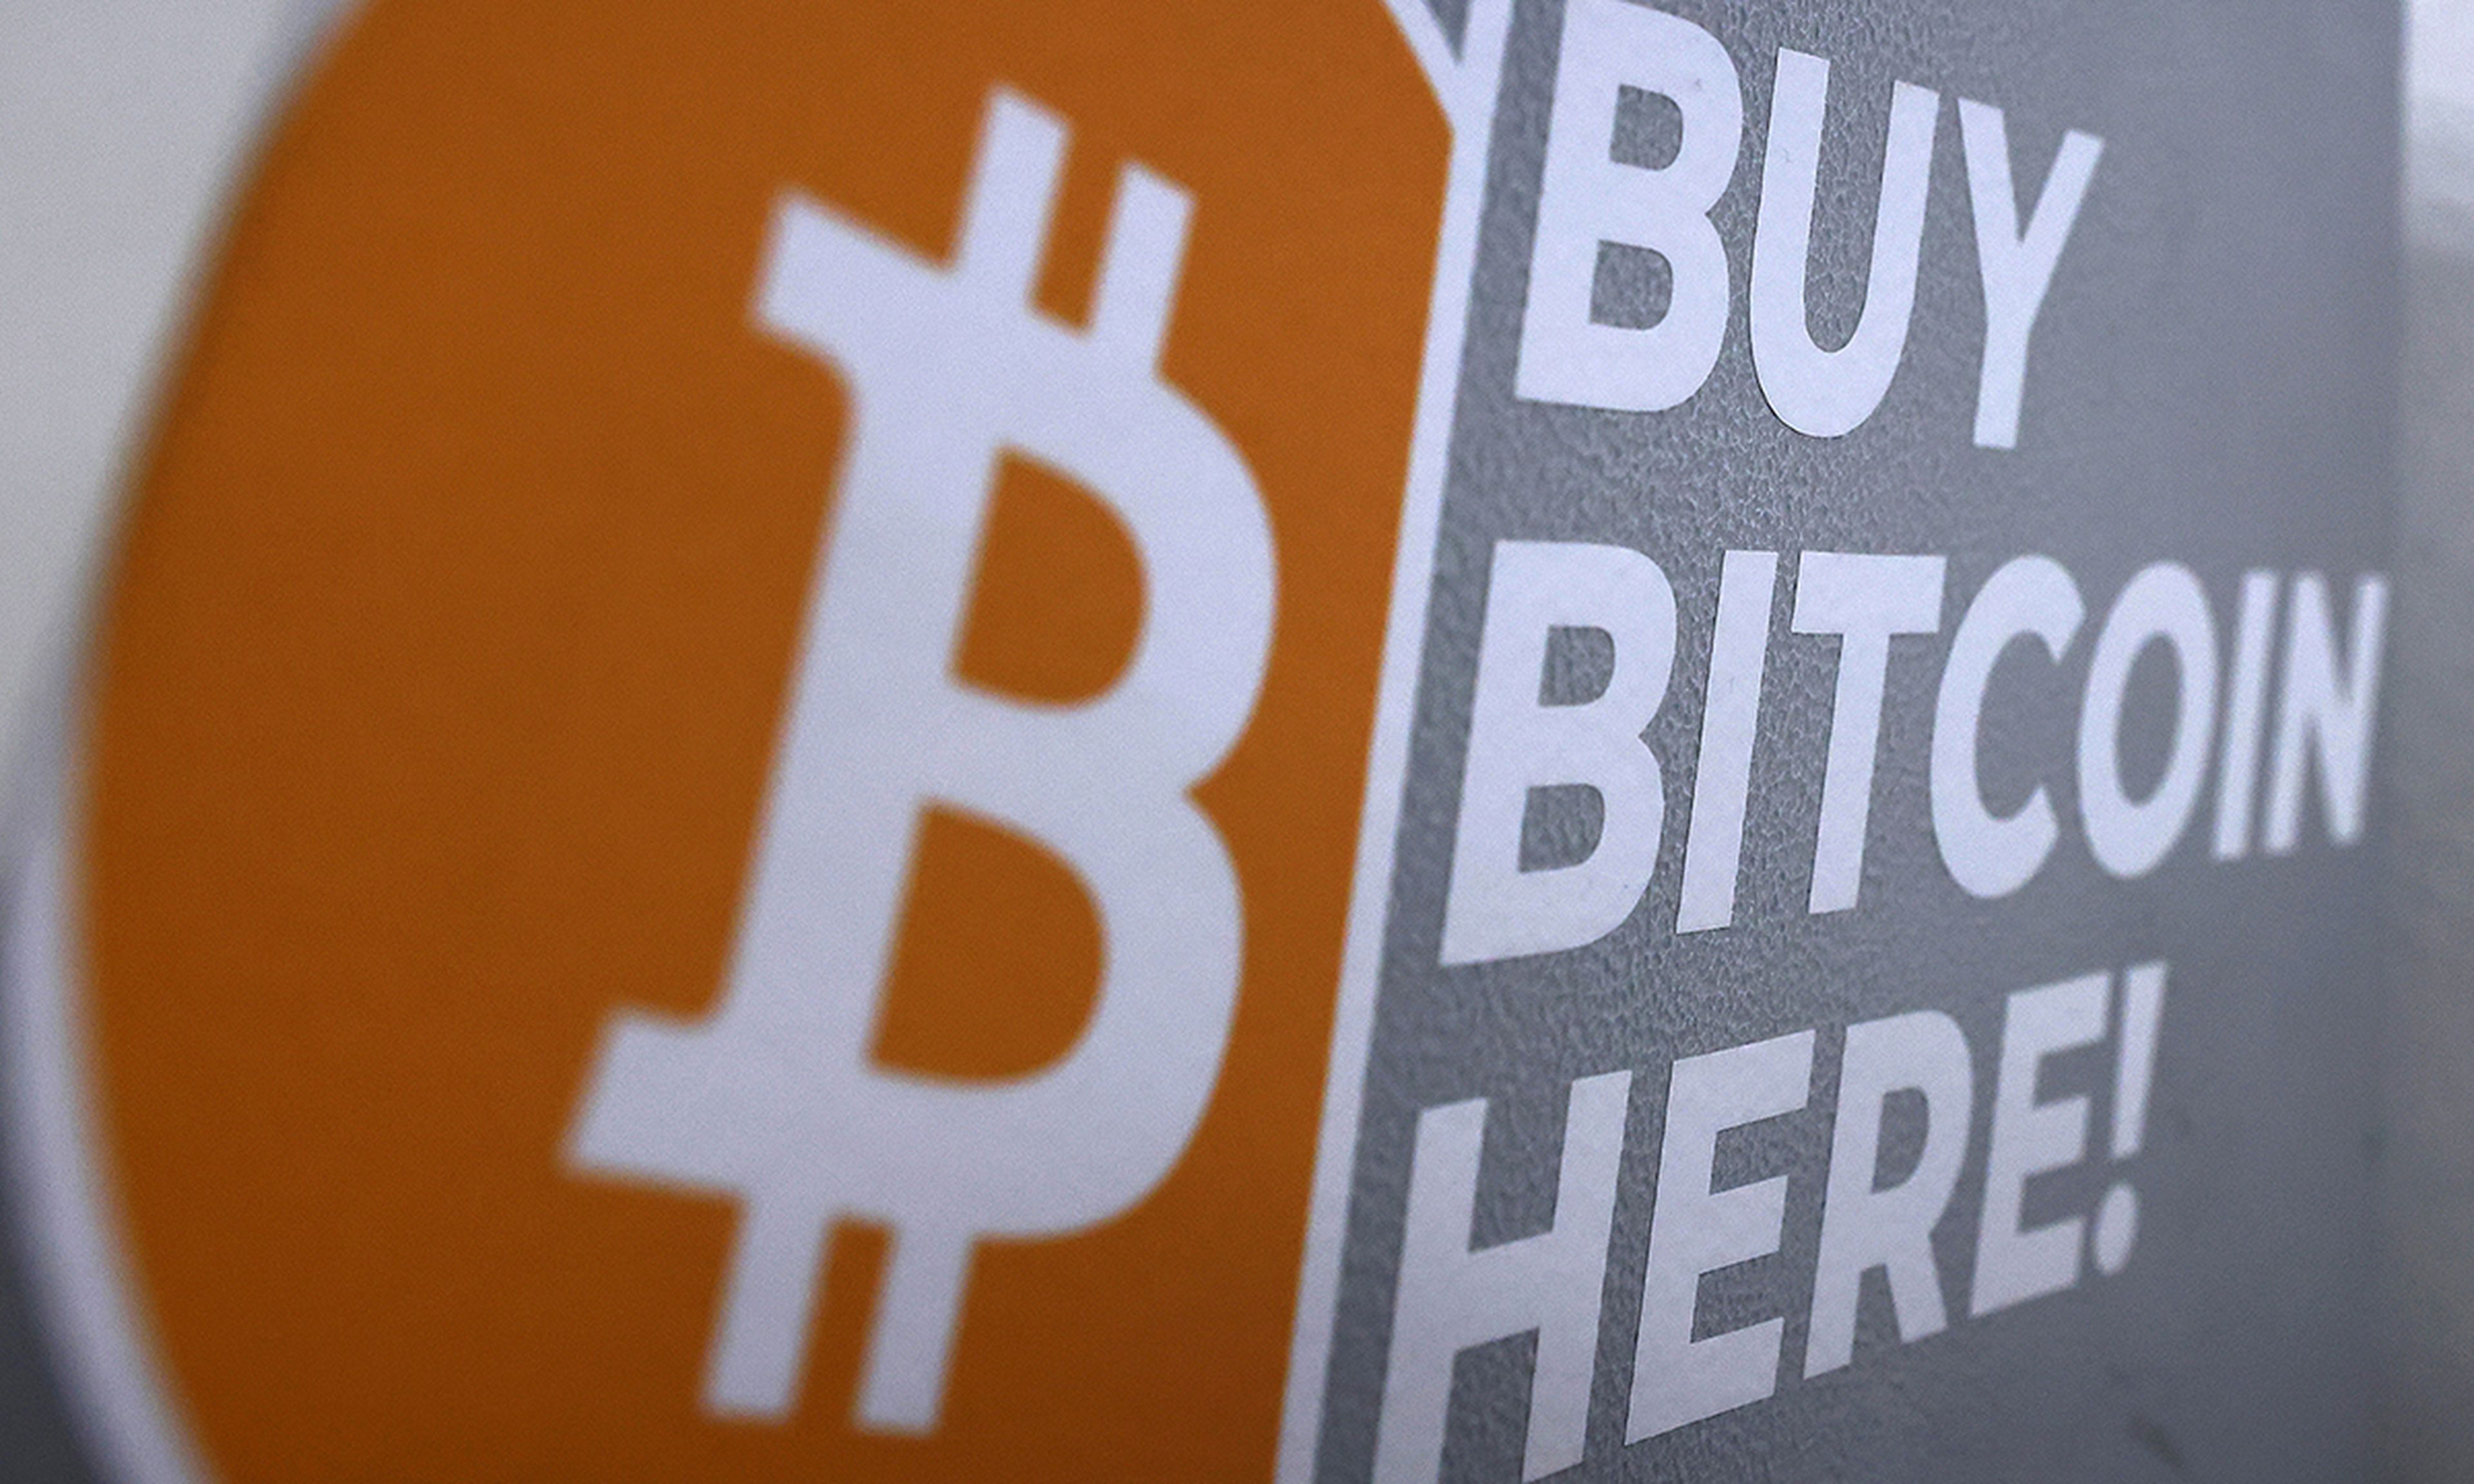 The Bitcoin logo is displayed on the side of a Bitcoin ATM on Nov. 10, 2021, in Los Angeles. (Photo by Mario Tama/Getty Images)